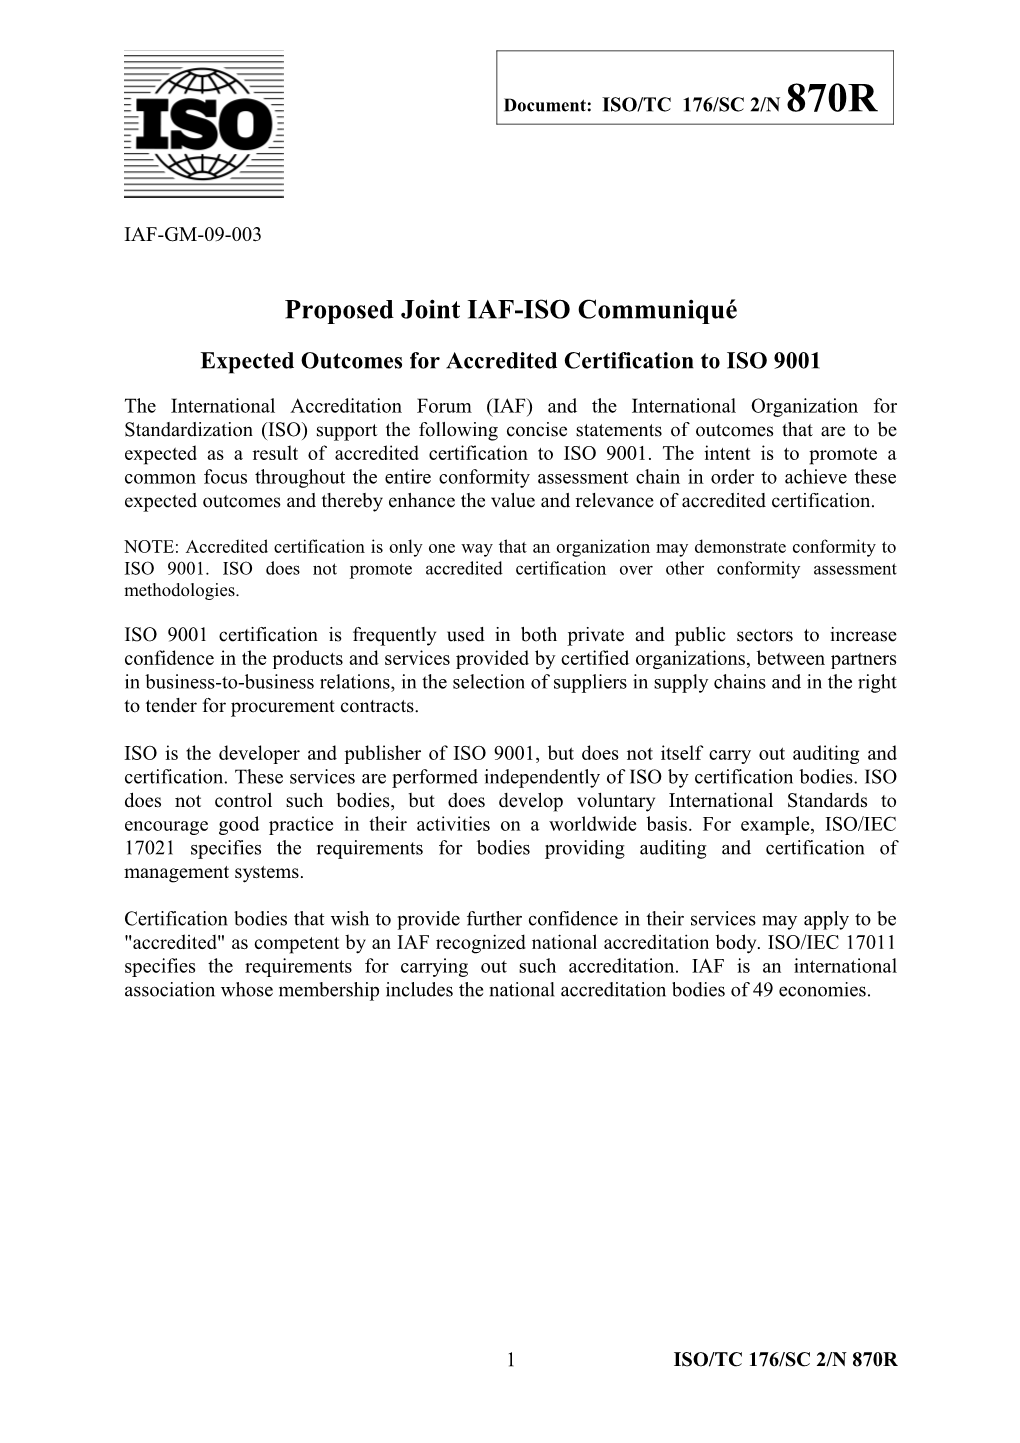 Proposed Joint IAF-ISO Communiqué